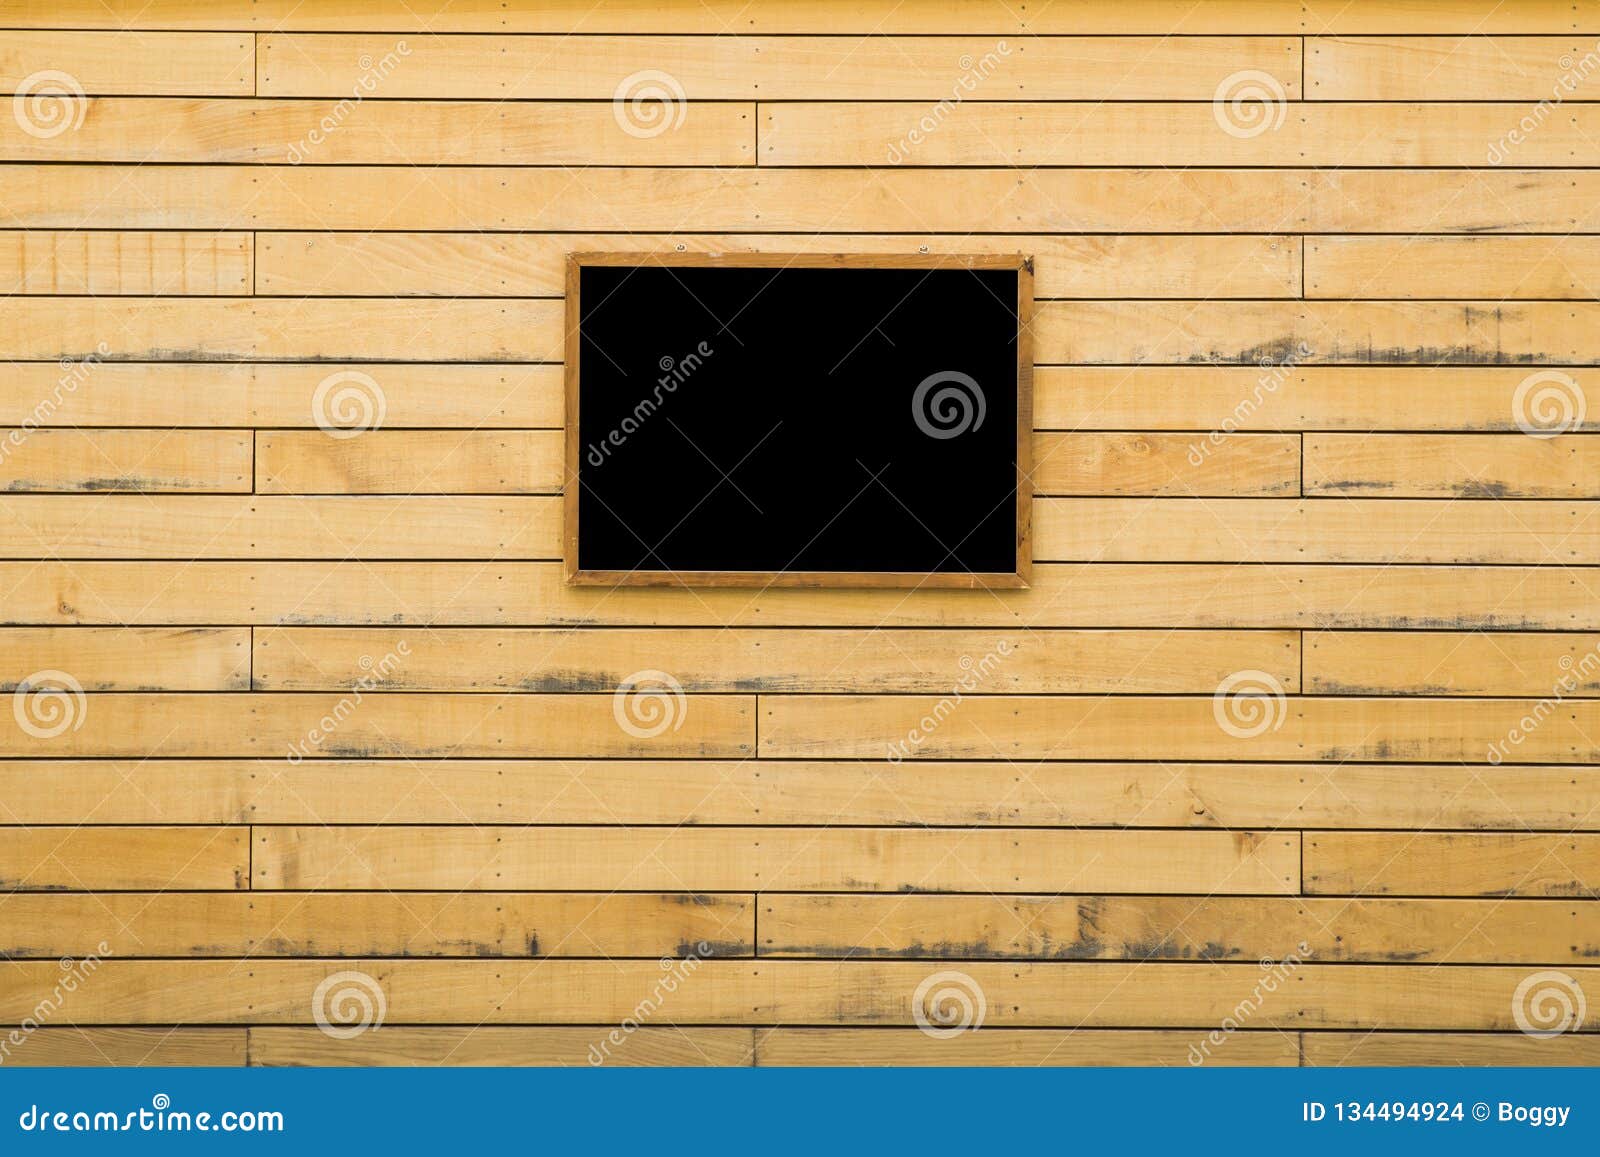 Old Picture Frame On Vintage Wood Wall Stock Photo Image of material, grungy 134494924